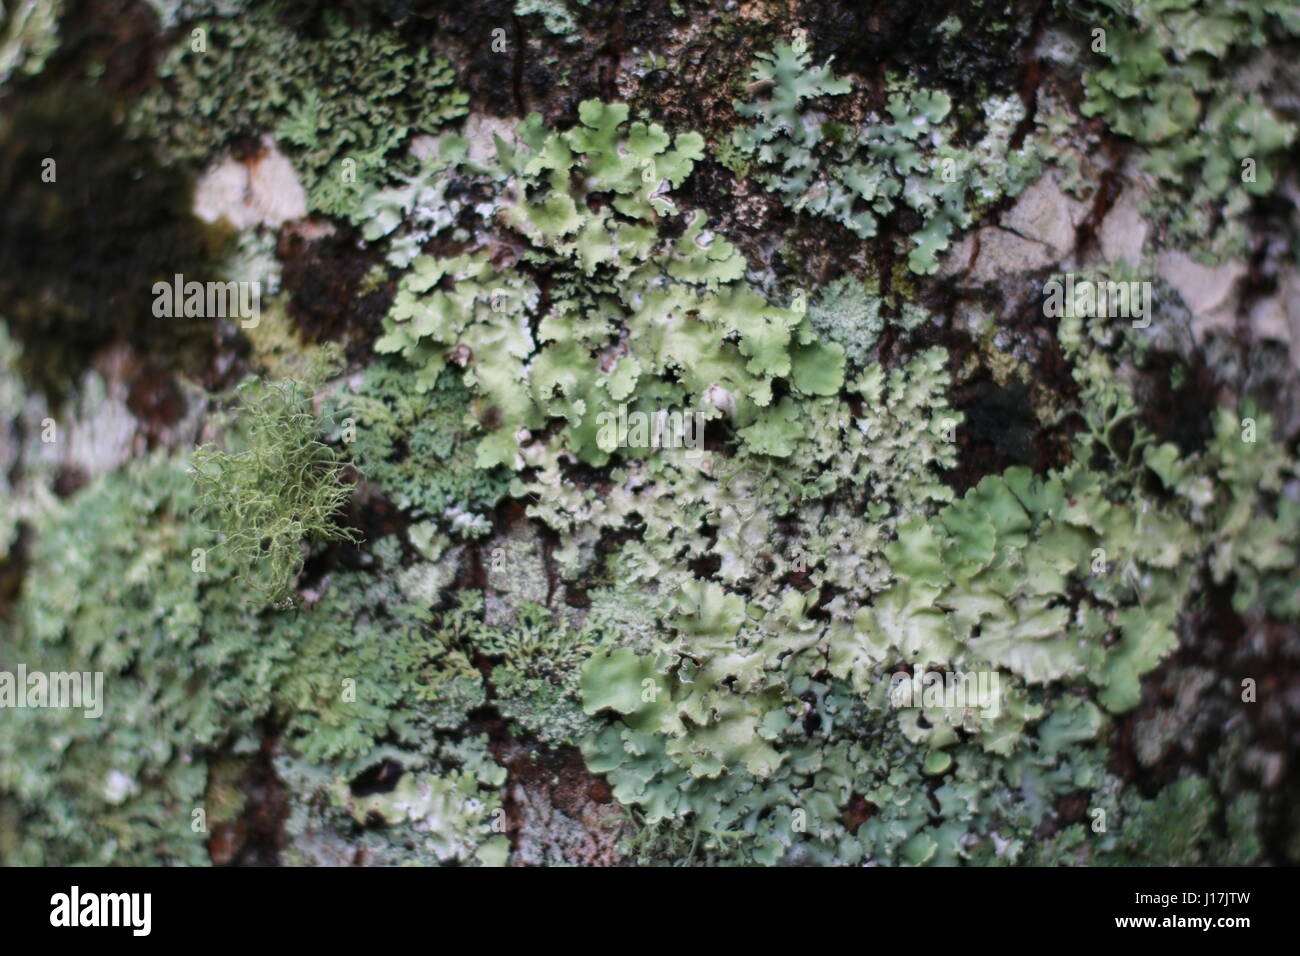 close up of textured lichen and moss growing on tree bark Stock Photo